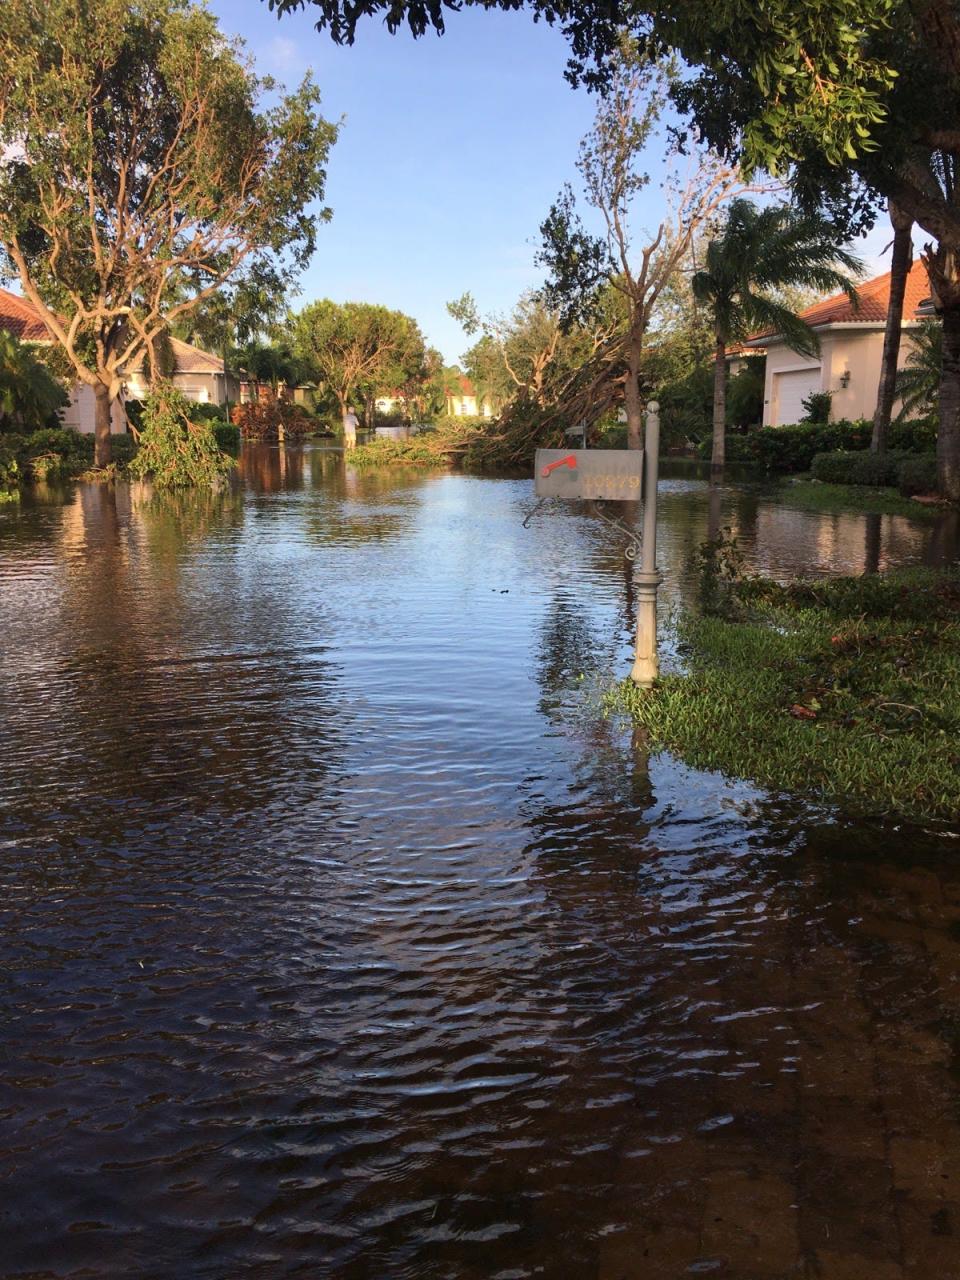 Flood waters left in the wake of Hurricane Irma in 2017 filled the roads near the Bonita Springs Golf and Country Club.